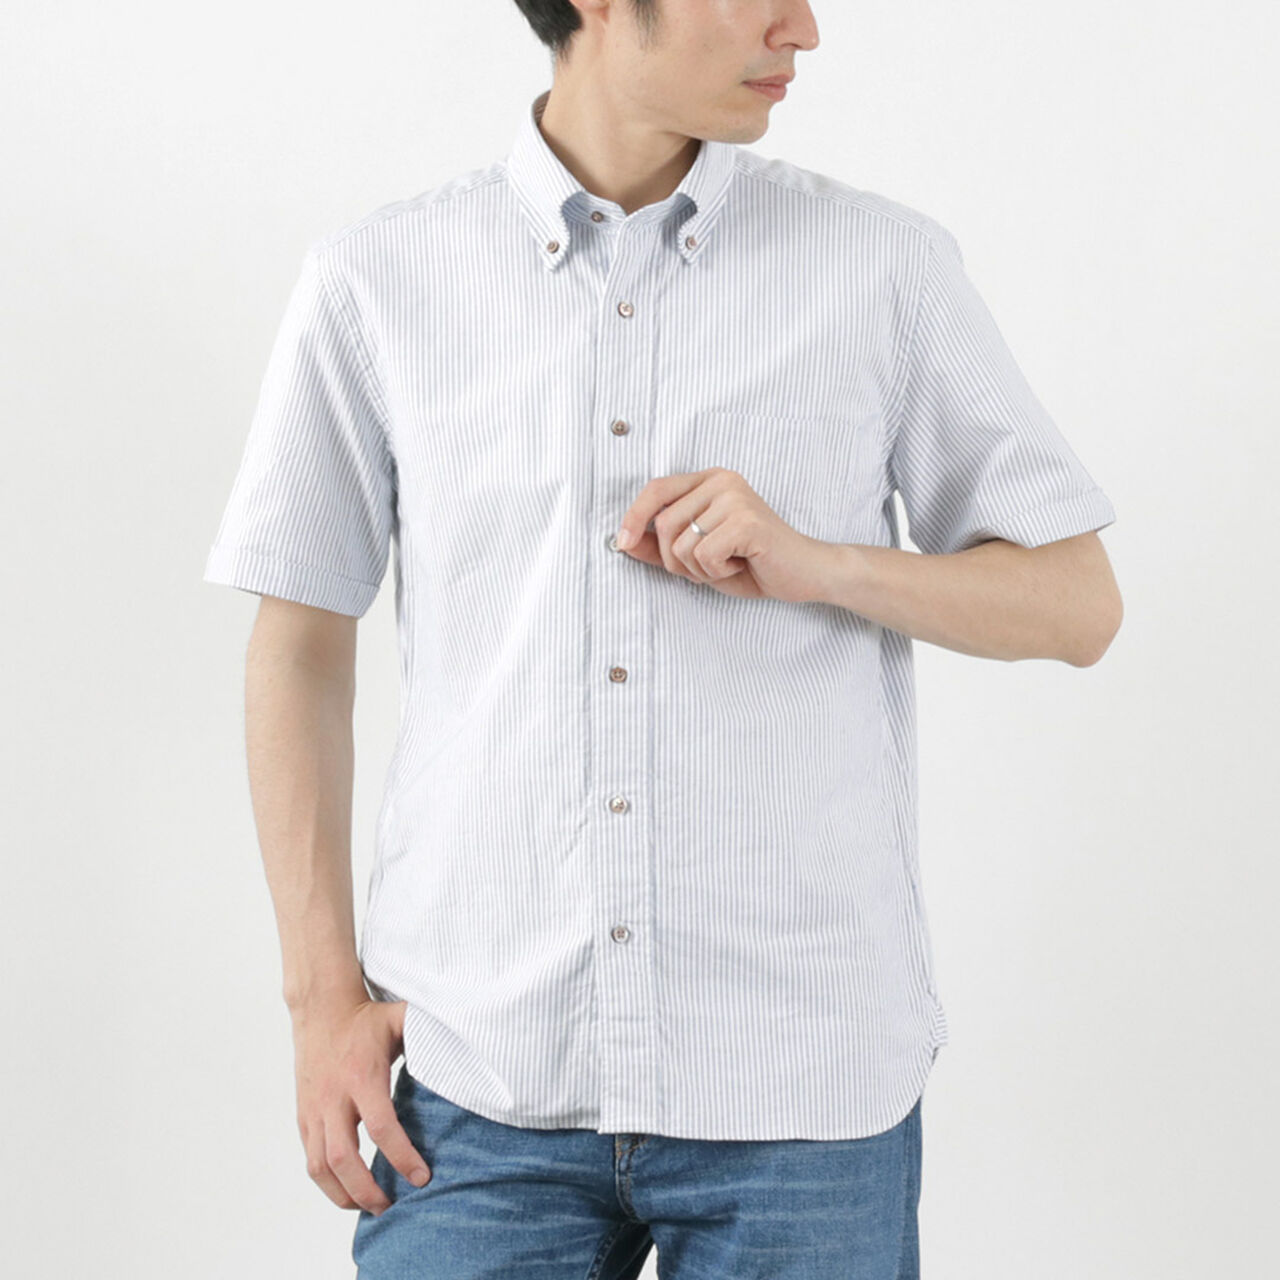 Premium Oxford Short Sleeve Button Down Shirt,Navy_White, large image number 0